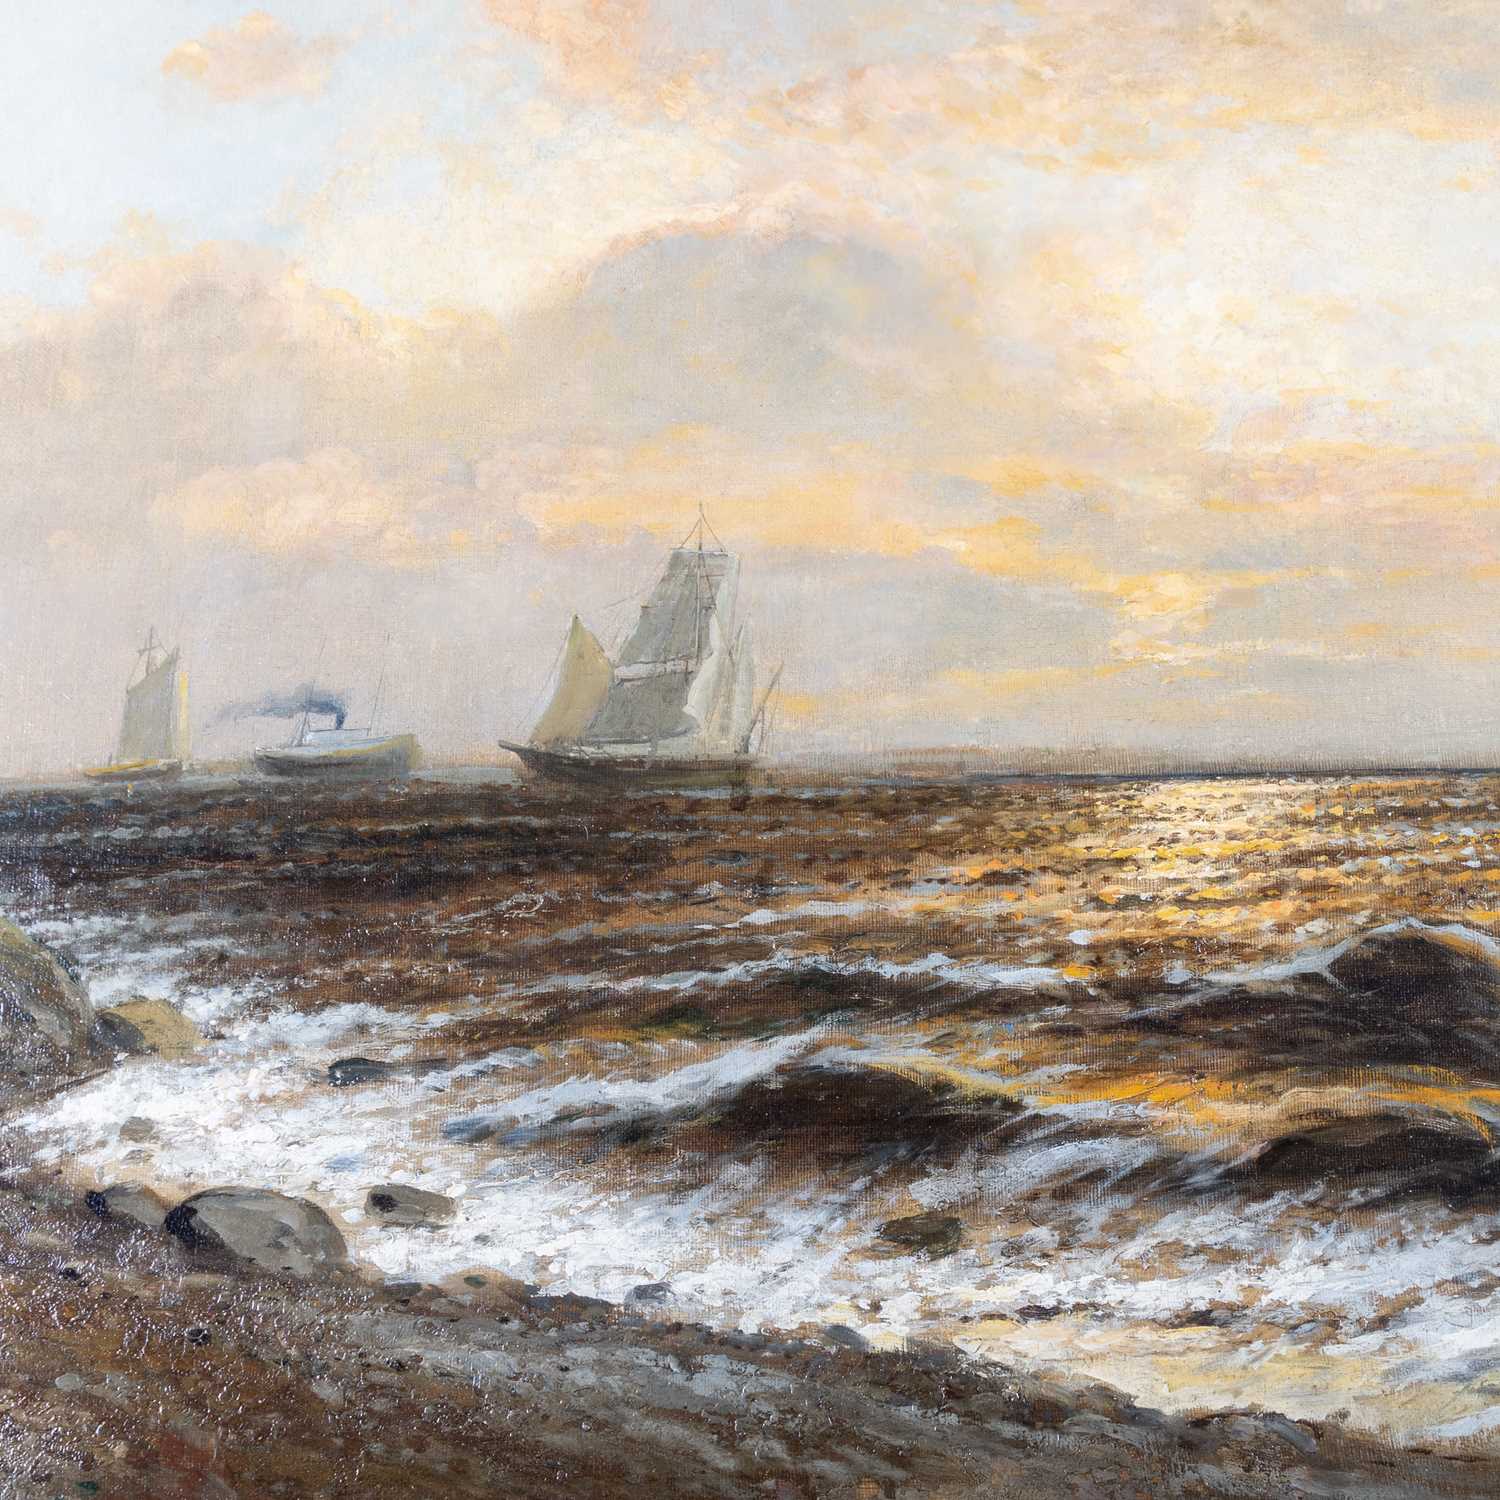 R RESSULLAY? (LATE 19TH CENTURY) SHIPS AND A STEAMER OFF THE COAST AT SUNSET - Image 3 of 5